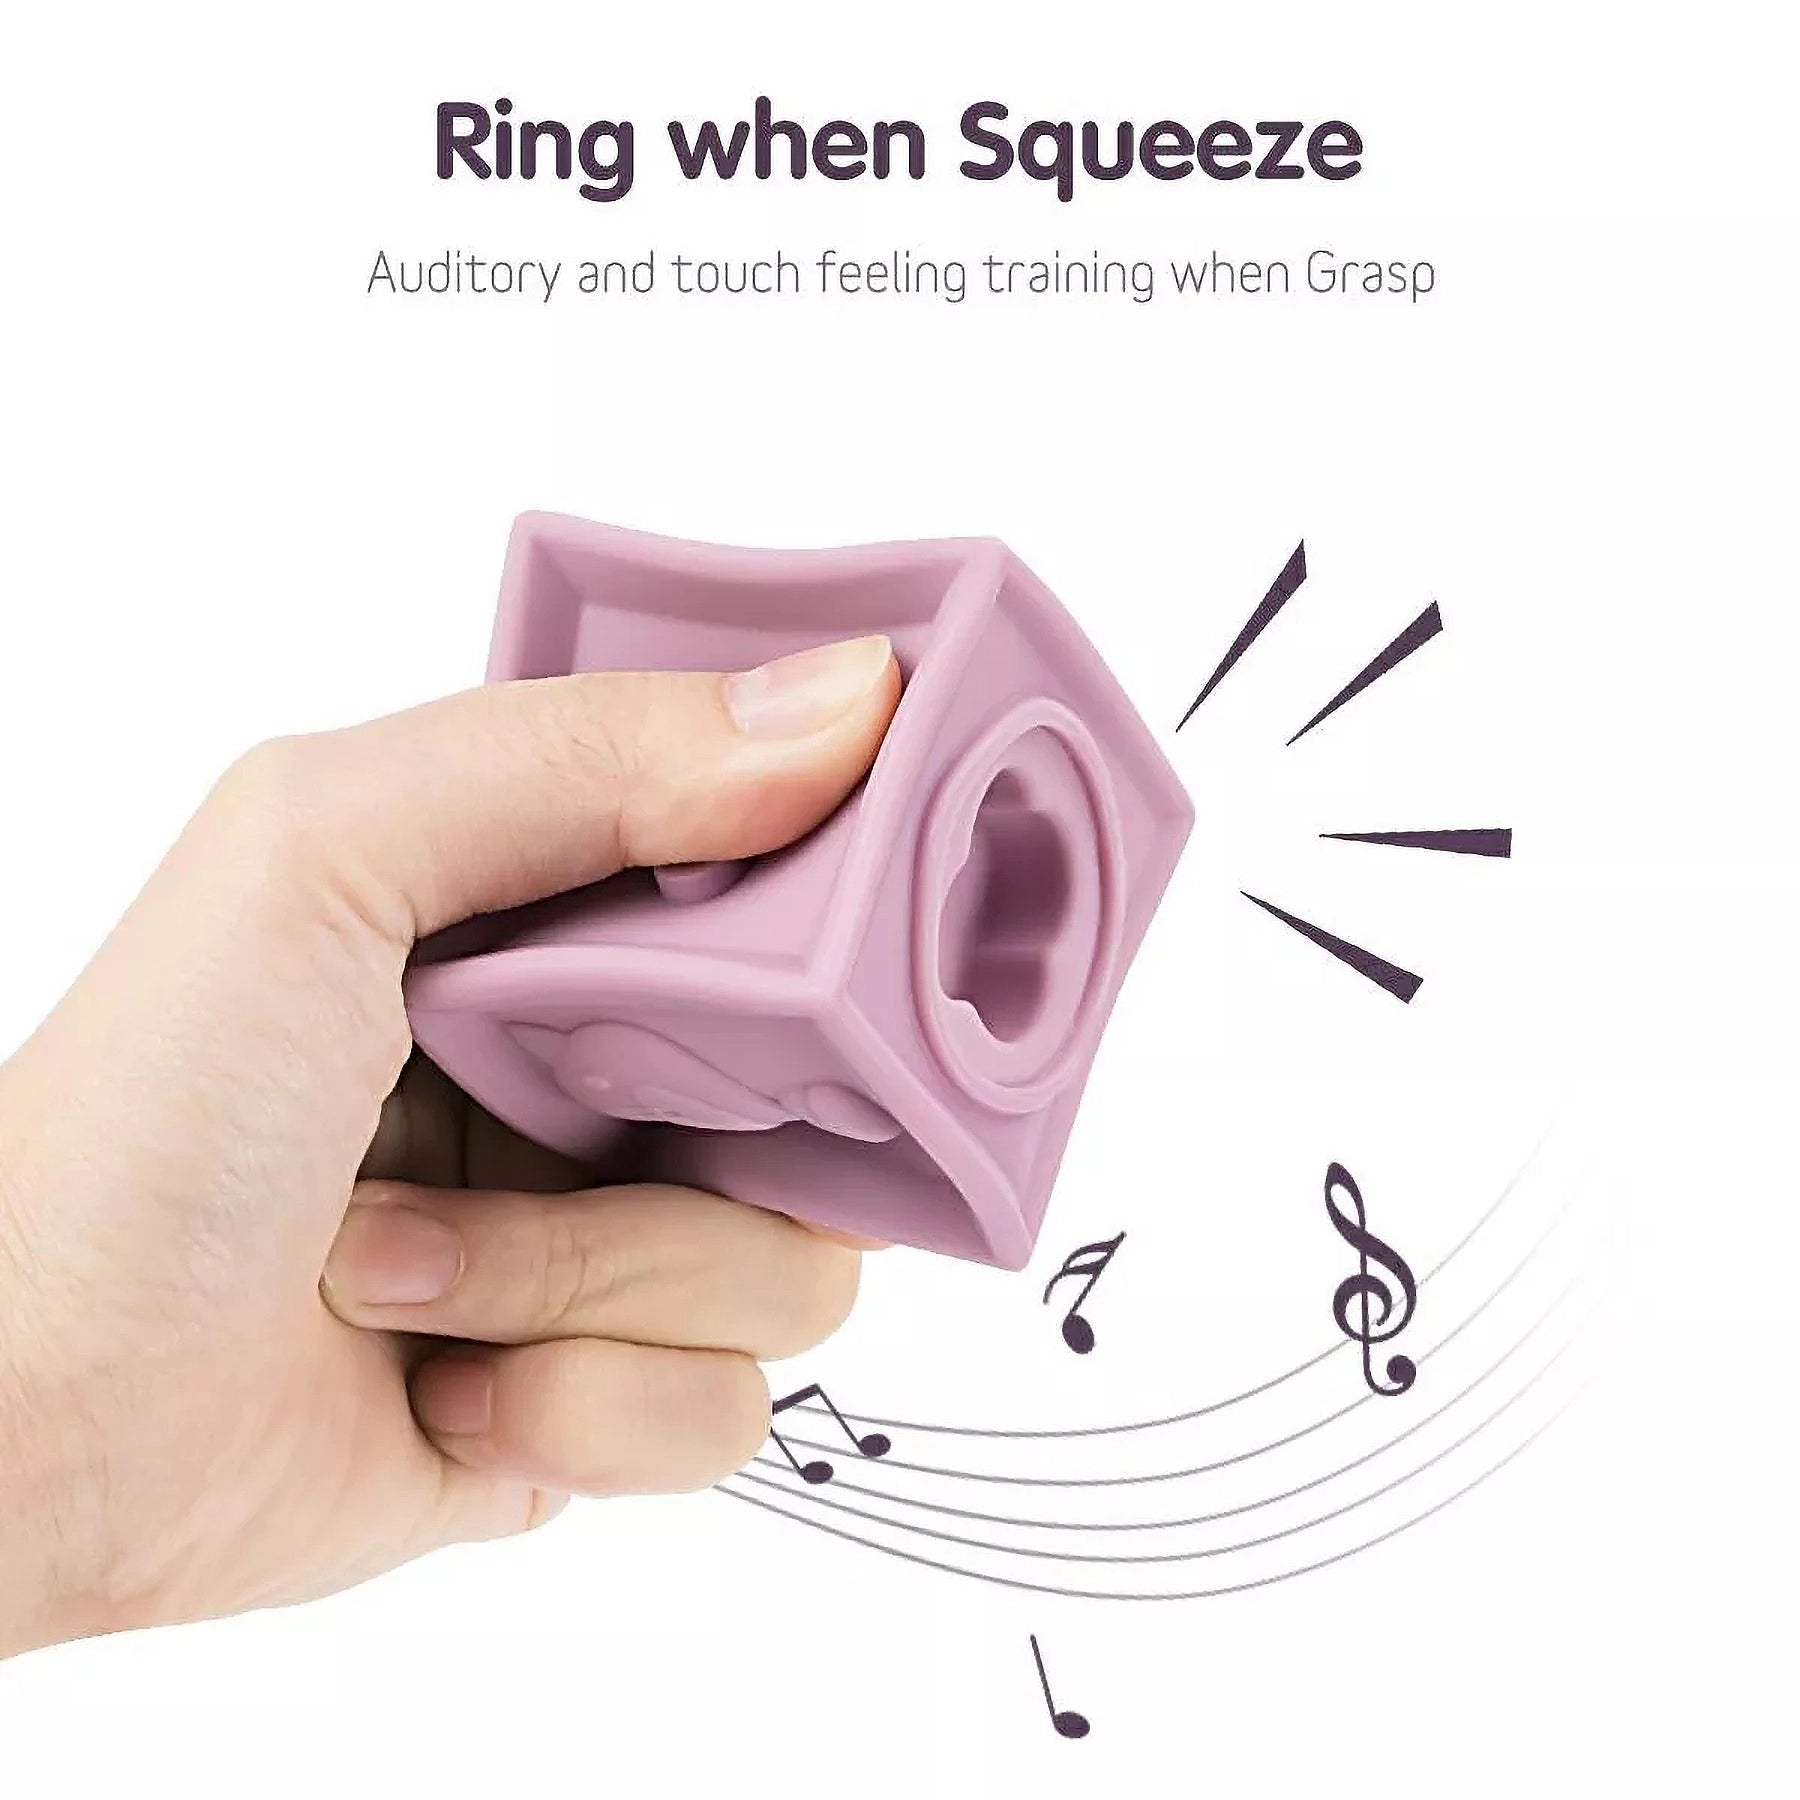 Teether toy featuring soft textures and squeeze cube for baby